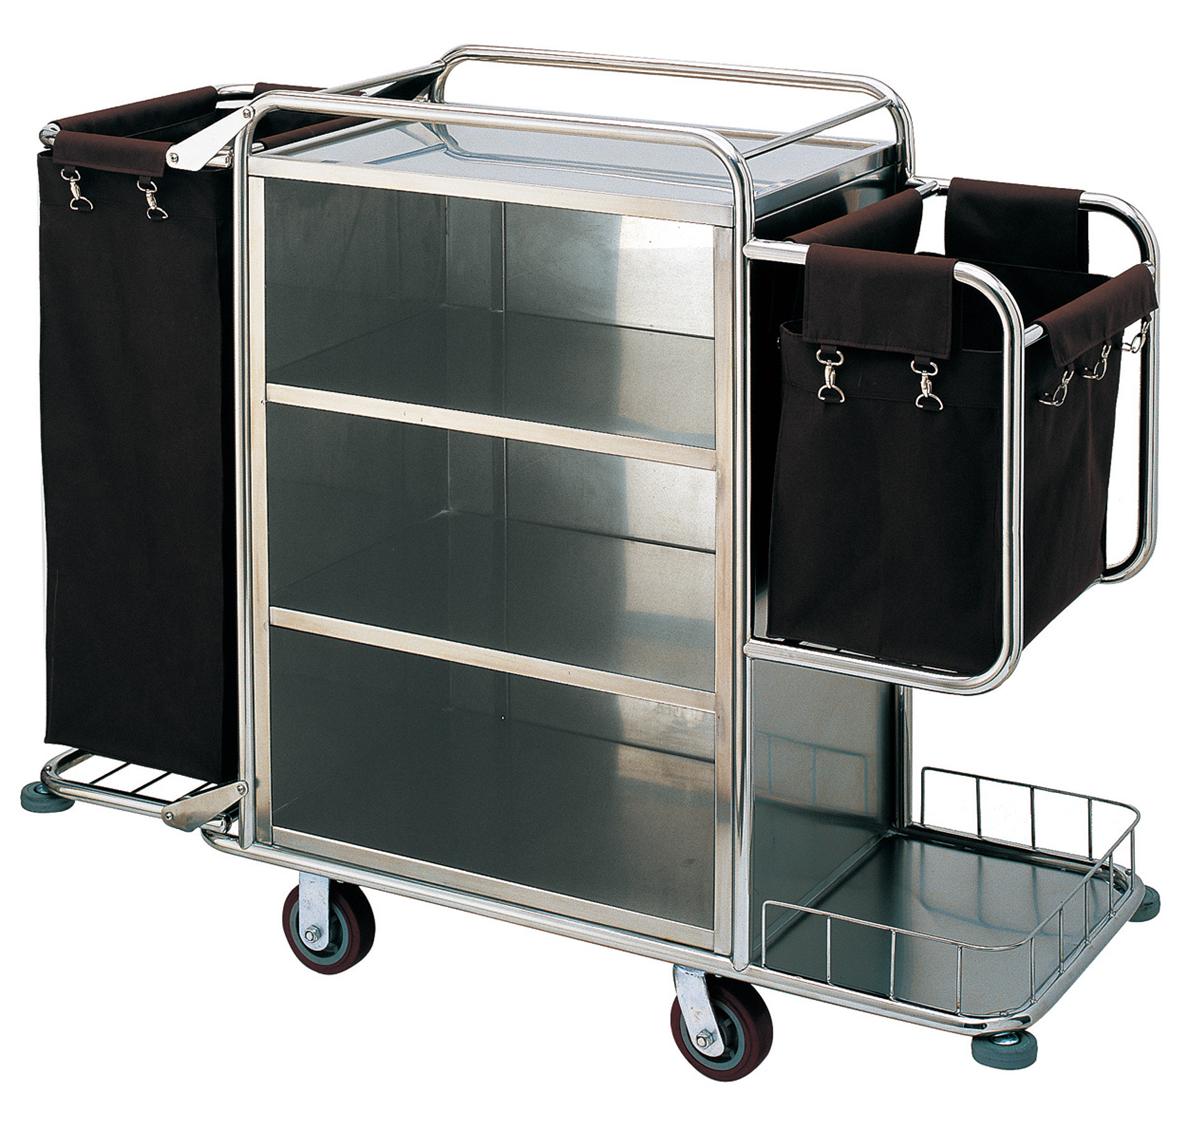 Stainless Steel Service Trolley for Hotel with Wheels